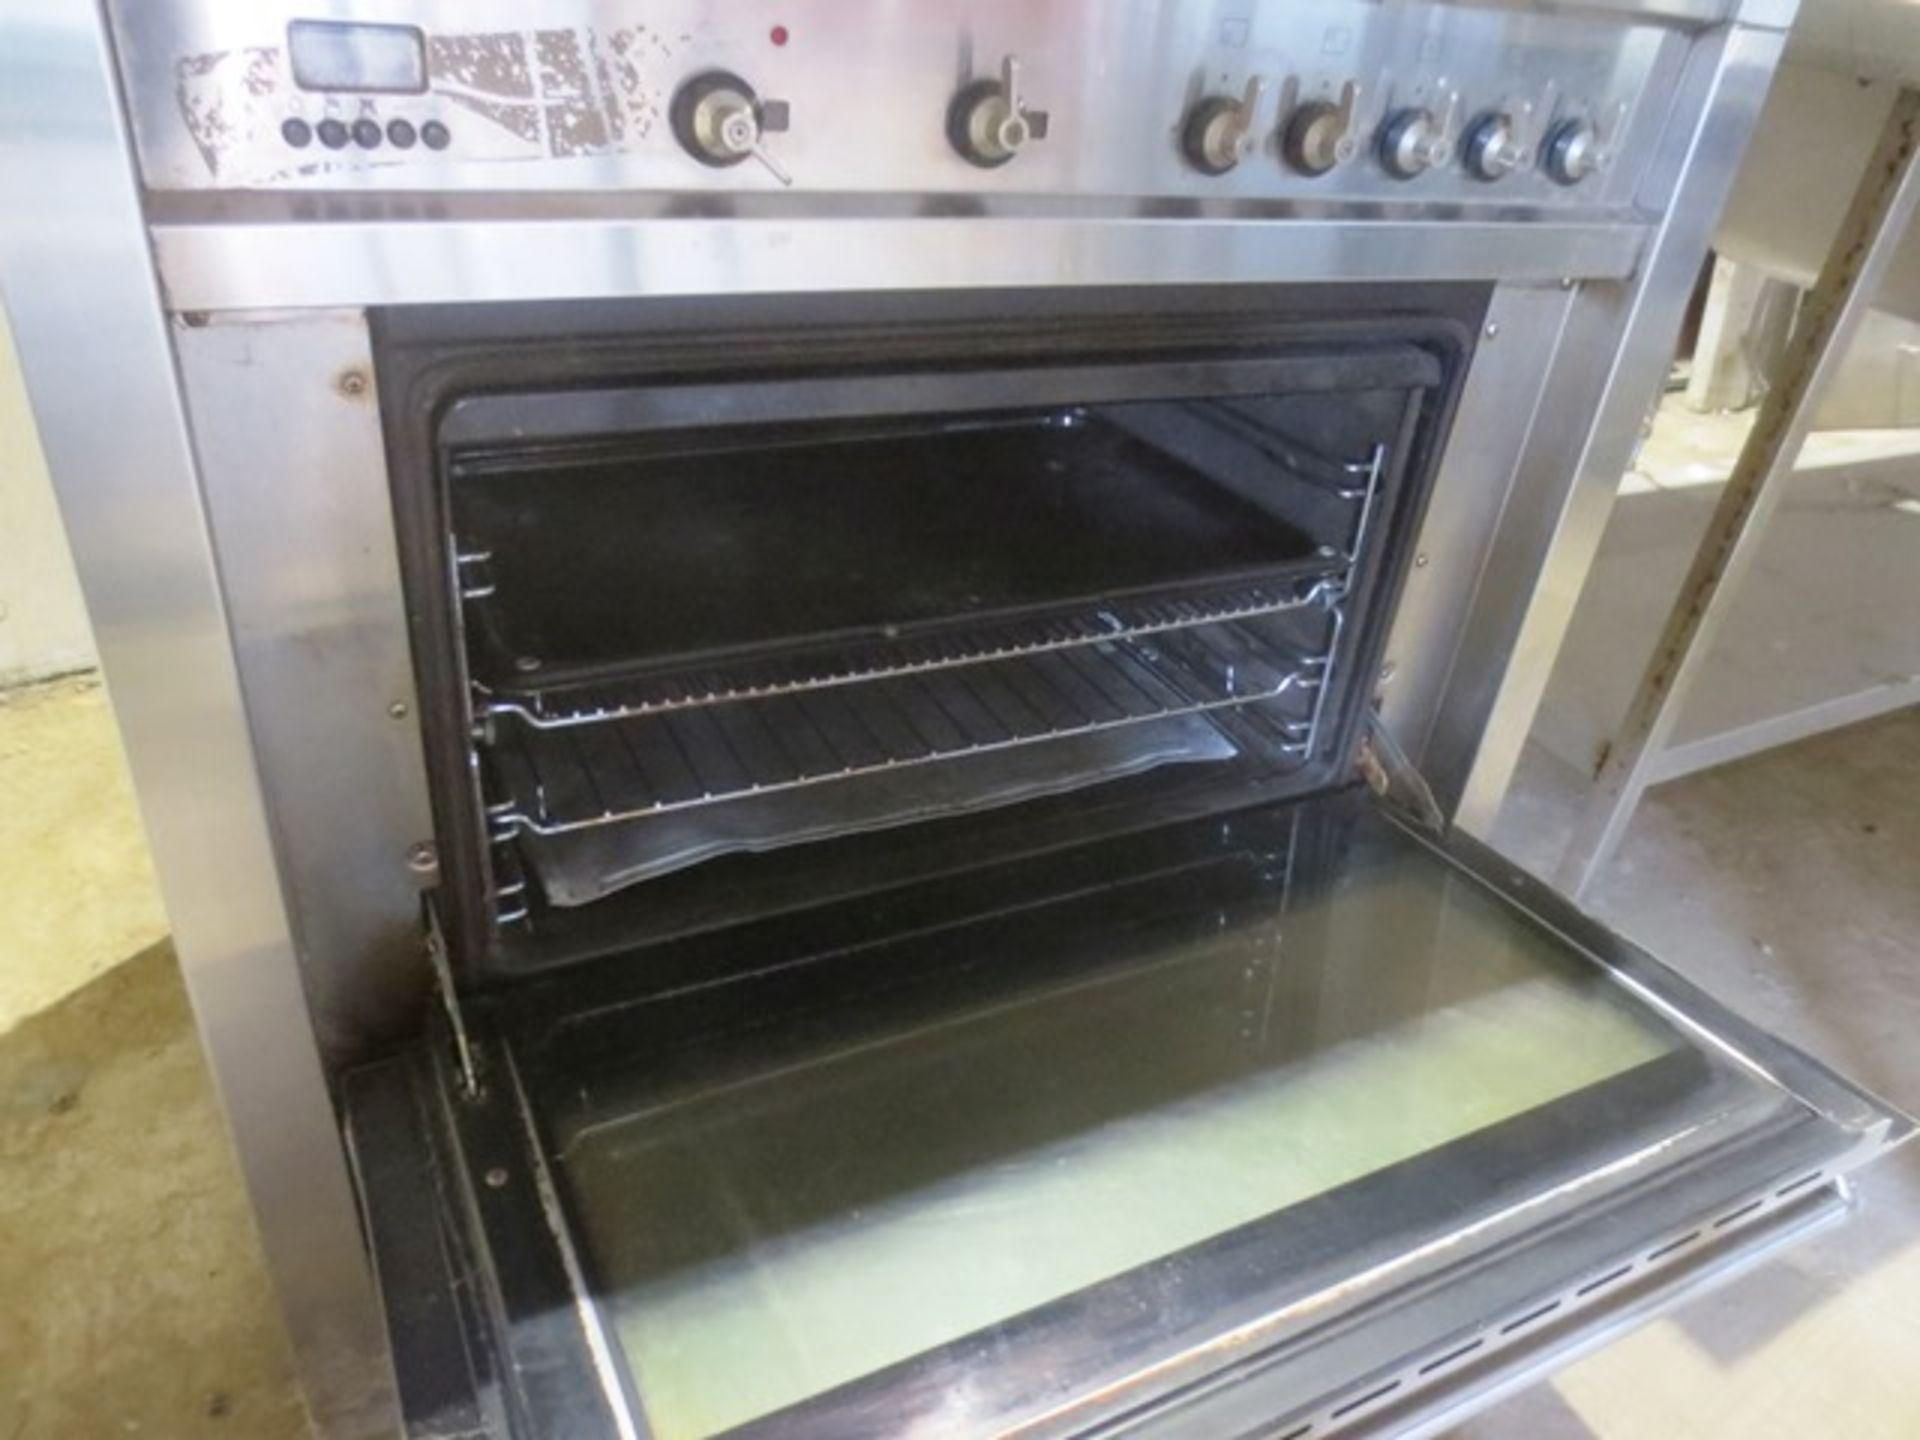 Smeg stainless teel gas fired 5 ring stove with single door oven, approx width 900mm - Image 2 of 2